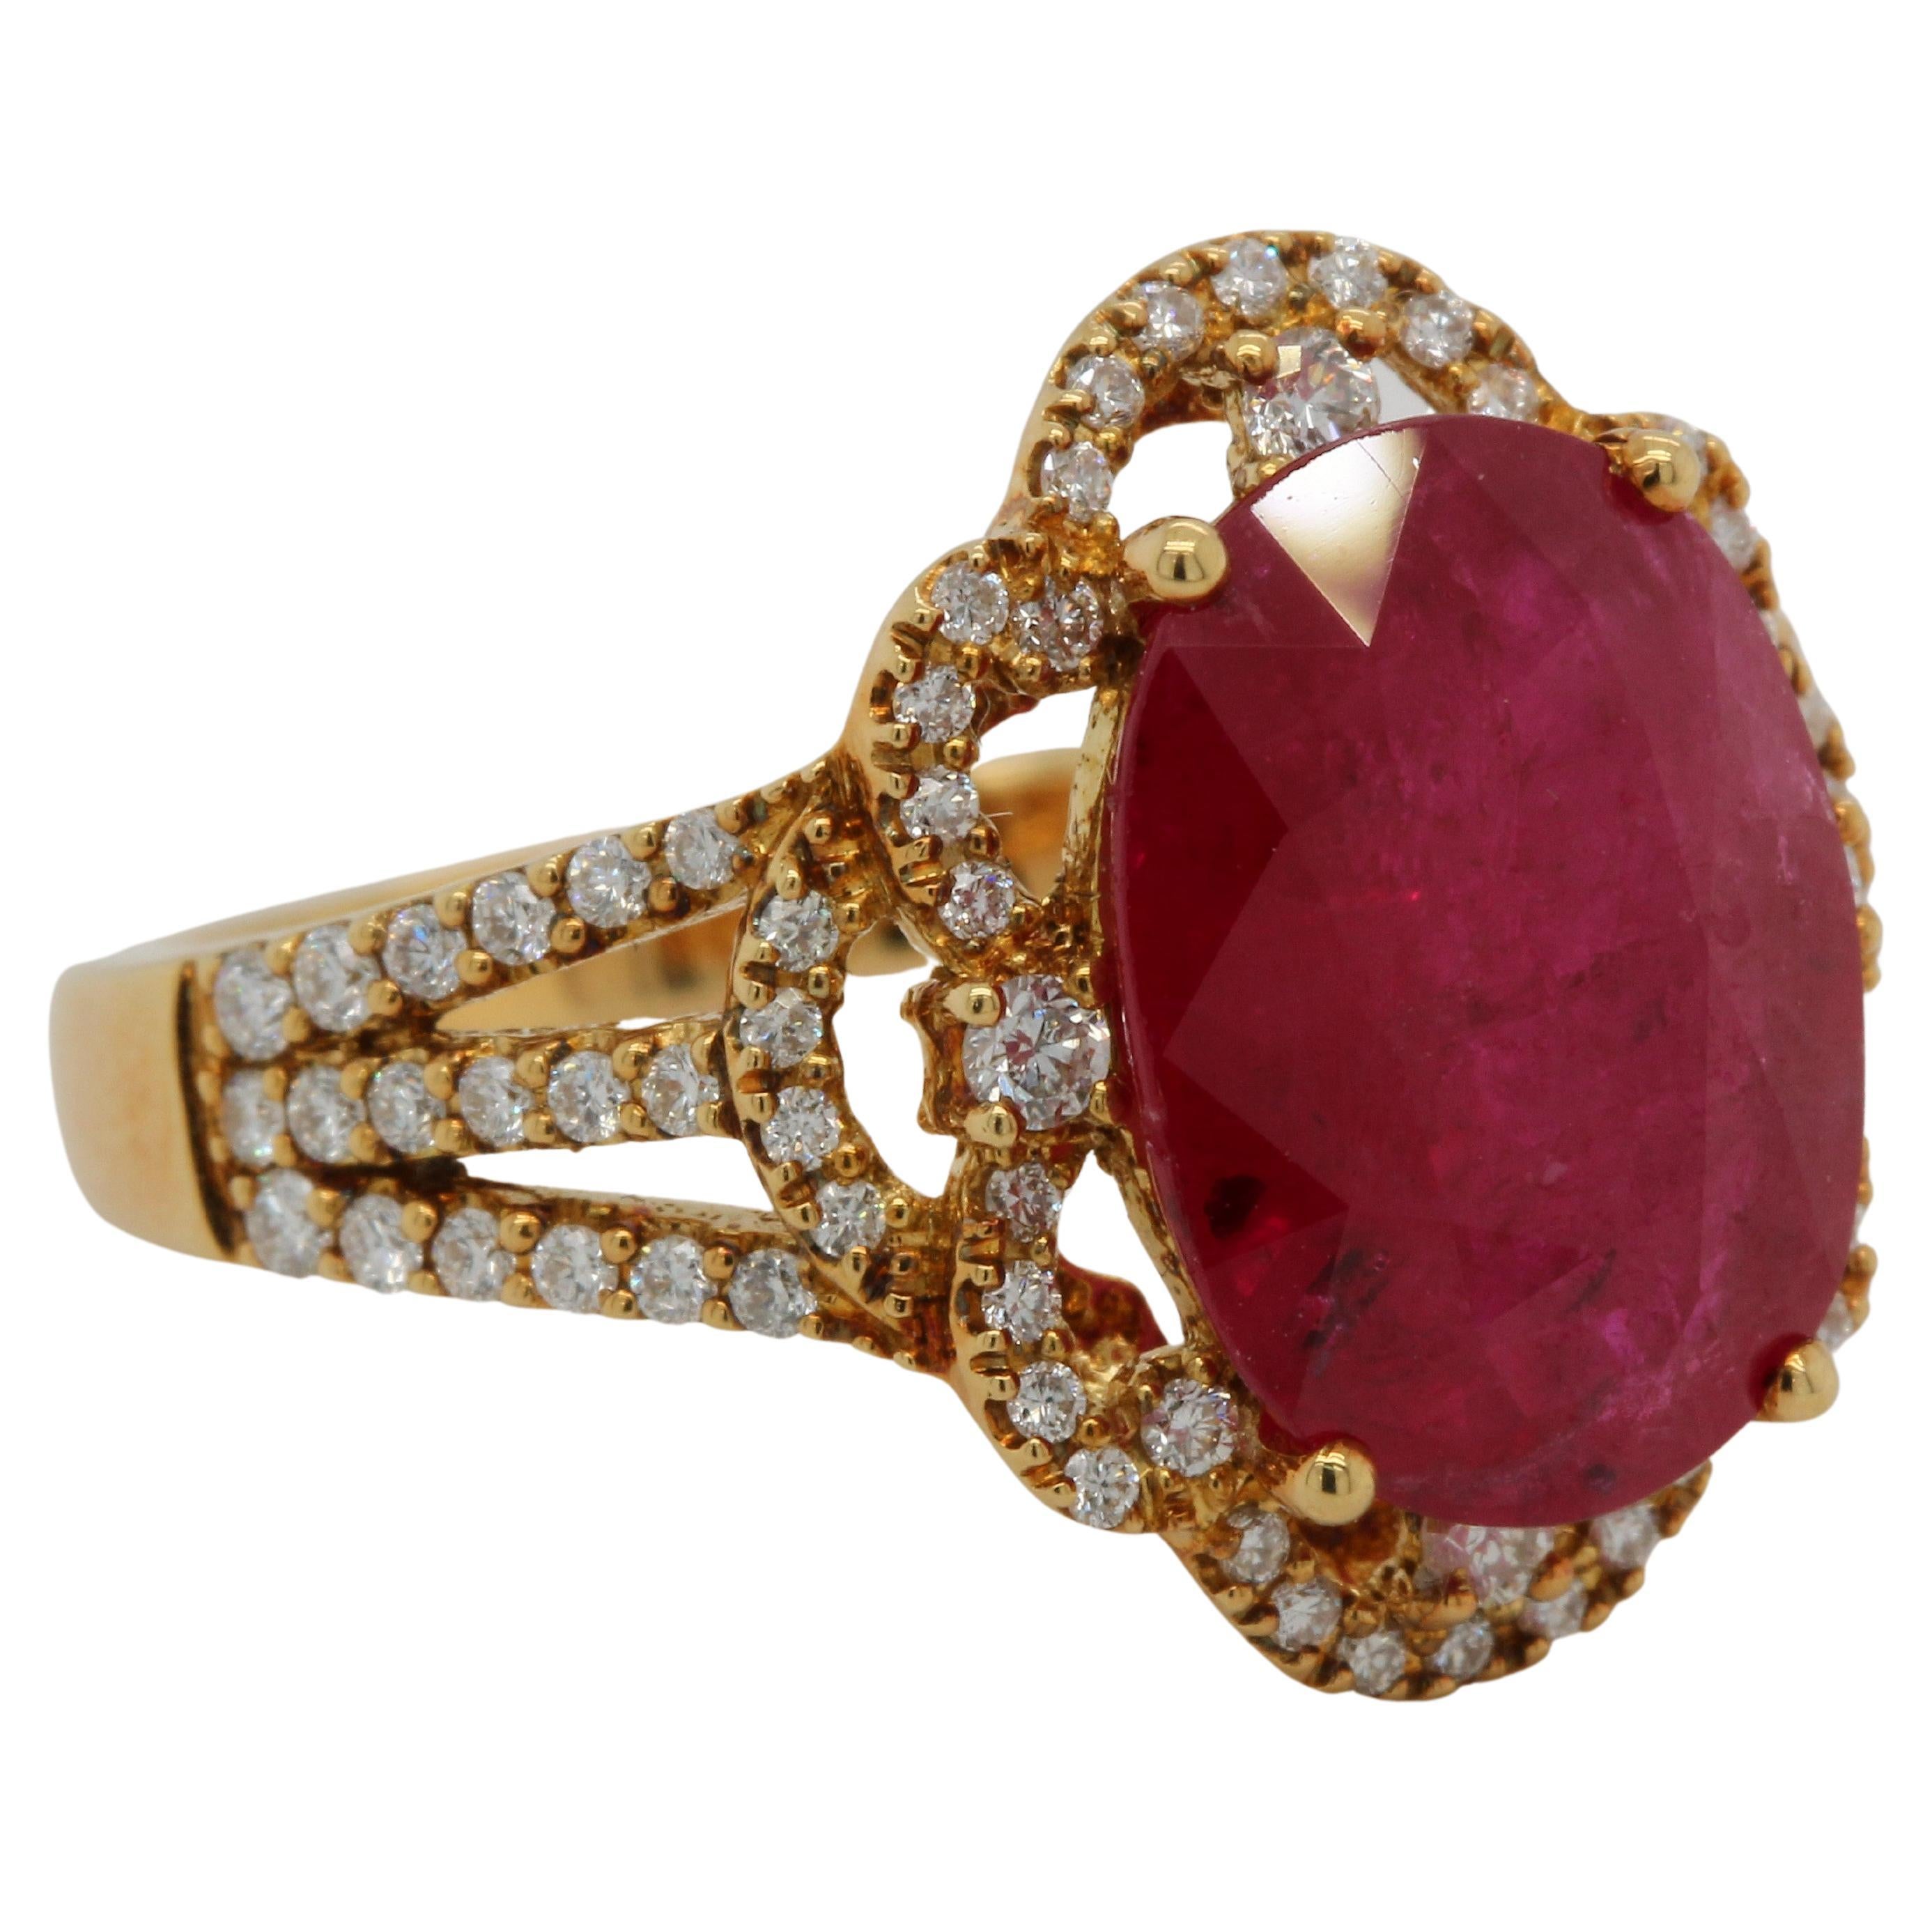 Oval Cut 5.19 Carat Ruby And Diamond Ring In 18 Karat Gold For Sale